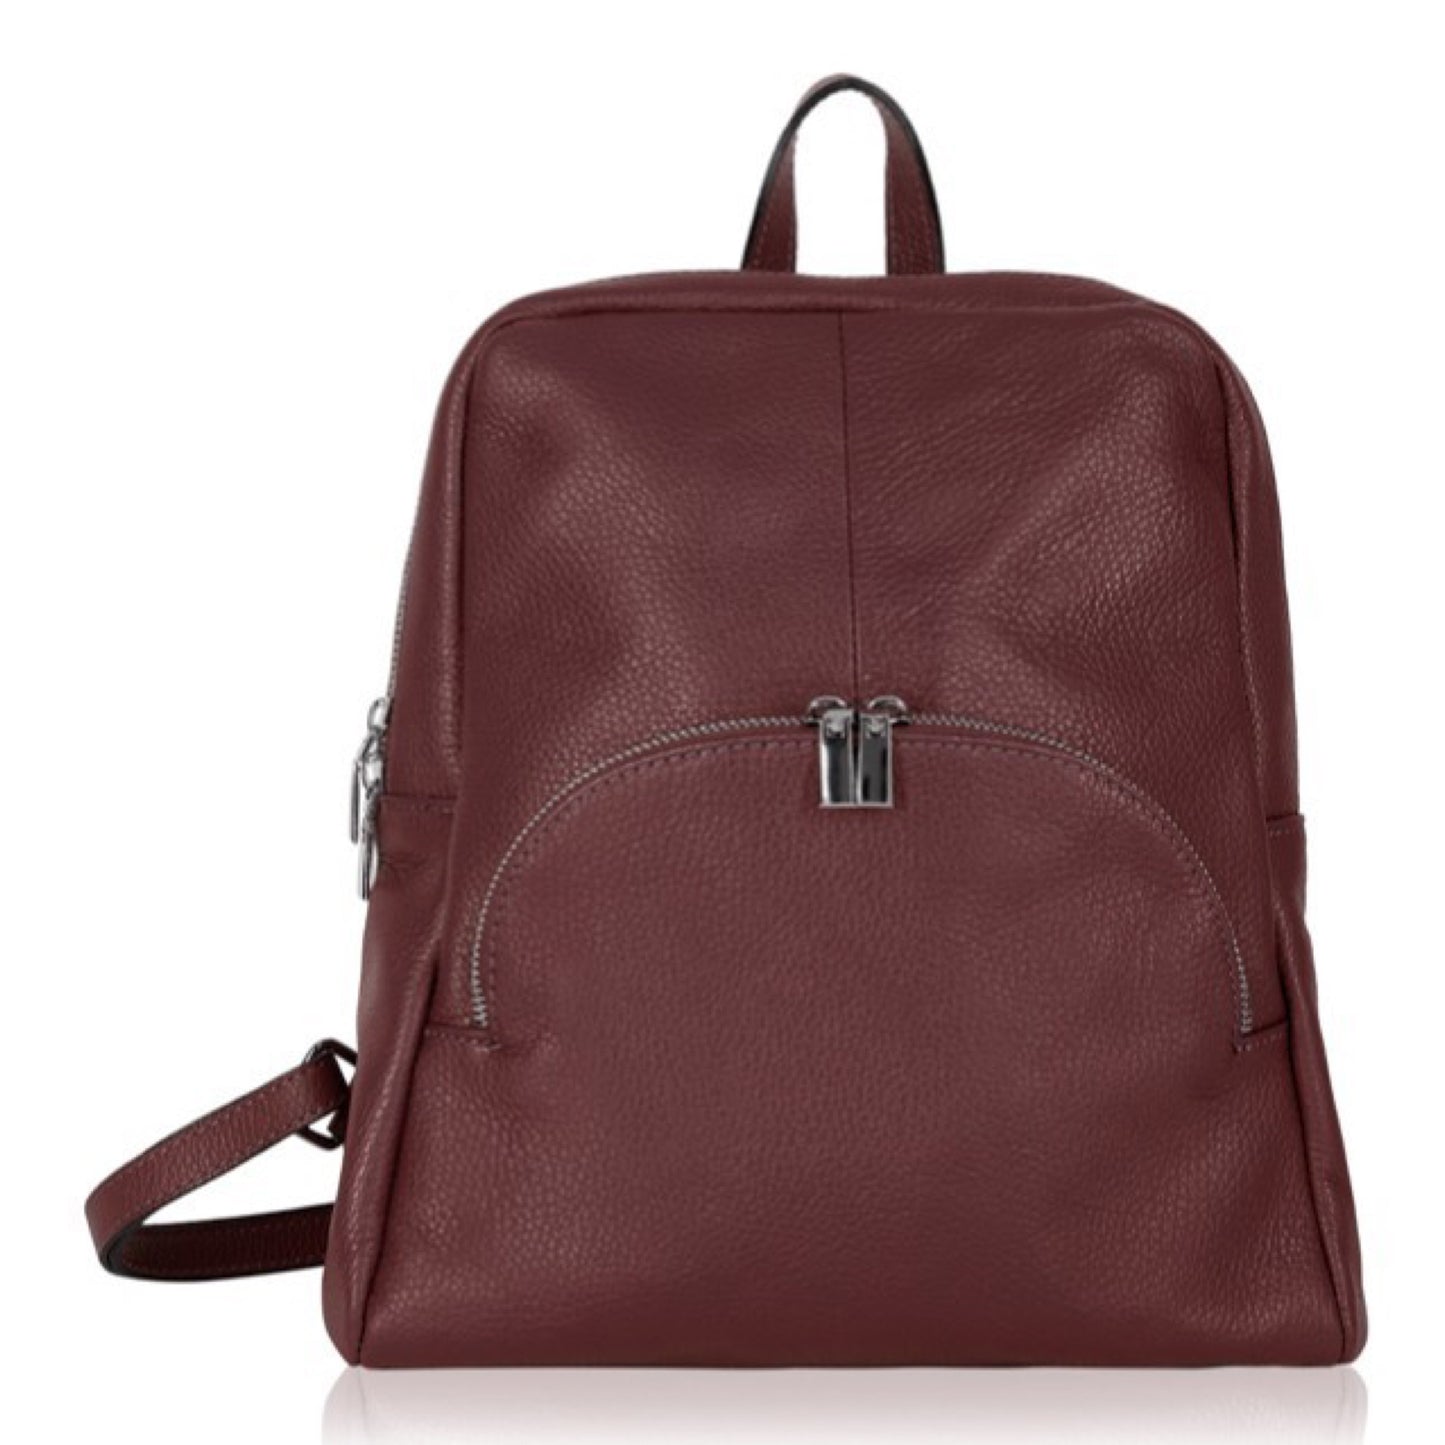 Jane - classic leather backpack